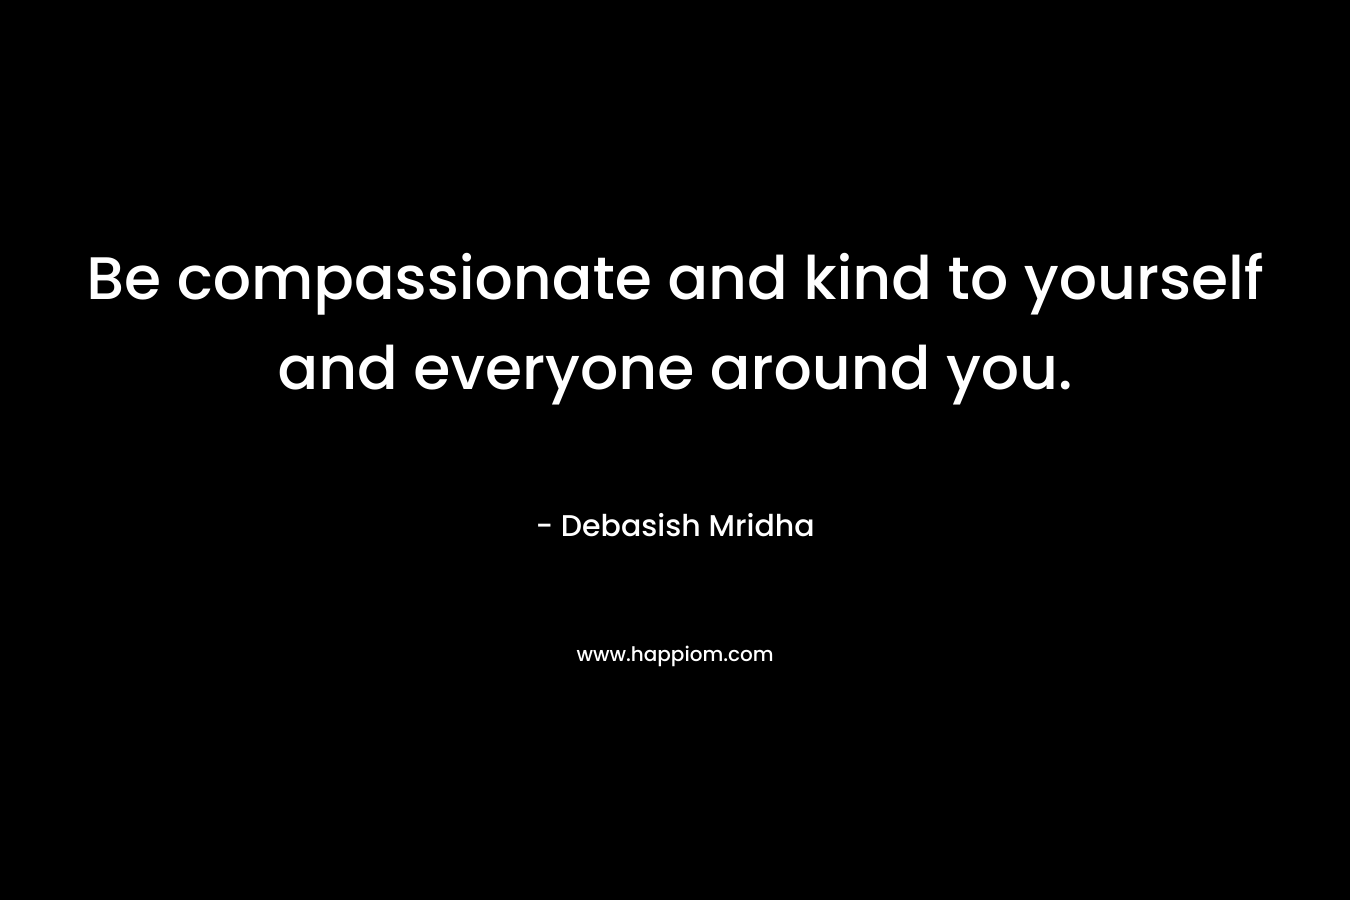 Be compassionate and kind to yourself and everyone around you.